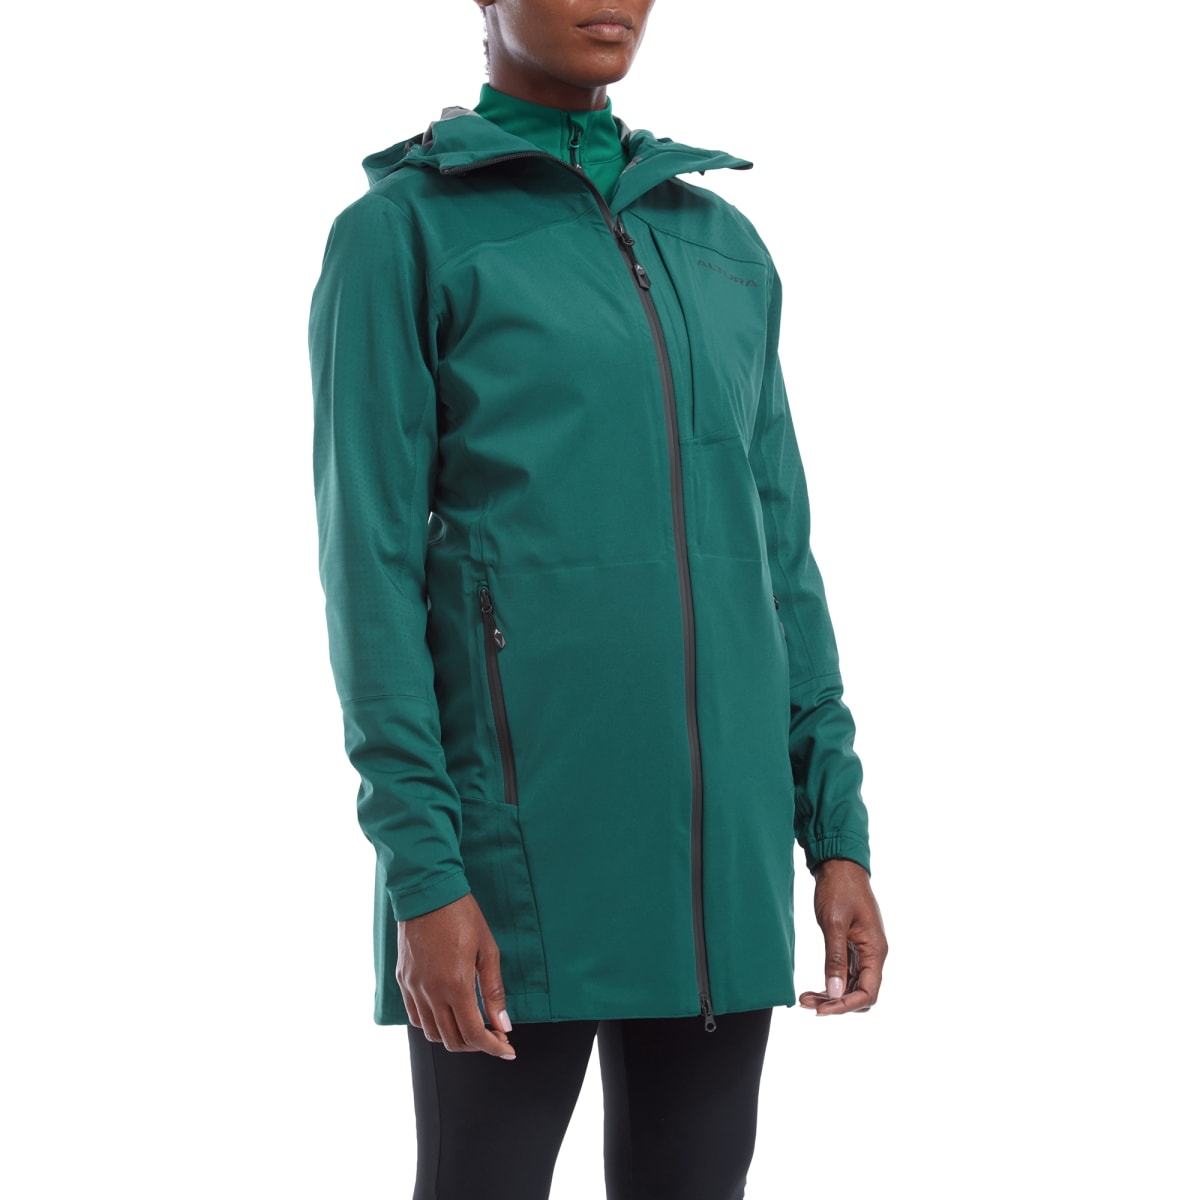 Altura  Nightvision Zephyr Womens Stretch Jacket 16 GREEN/TEAL